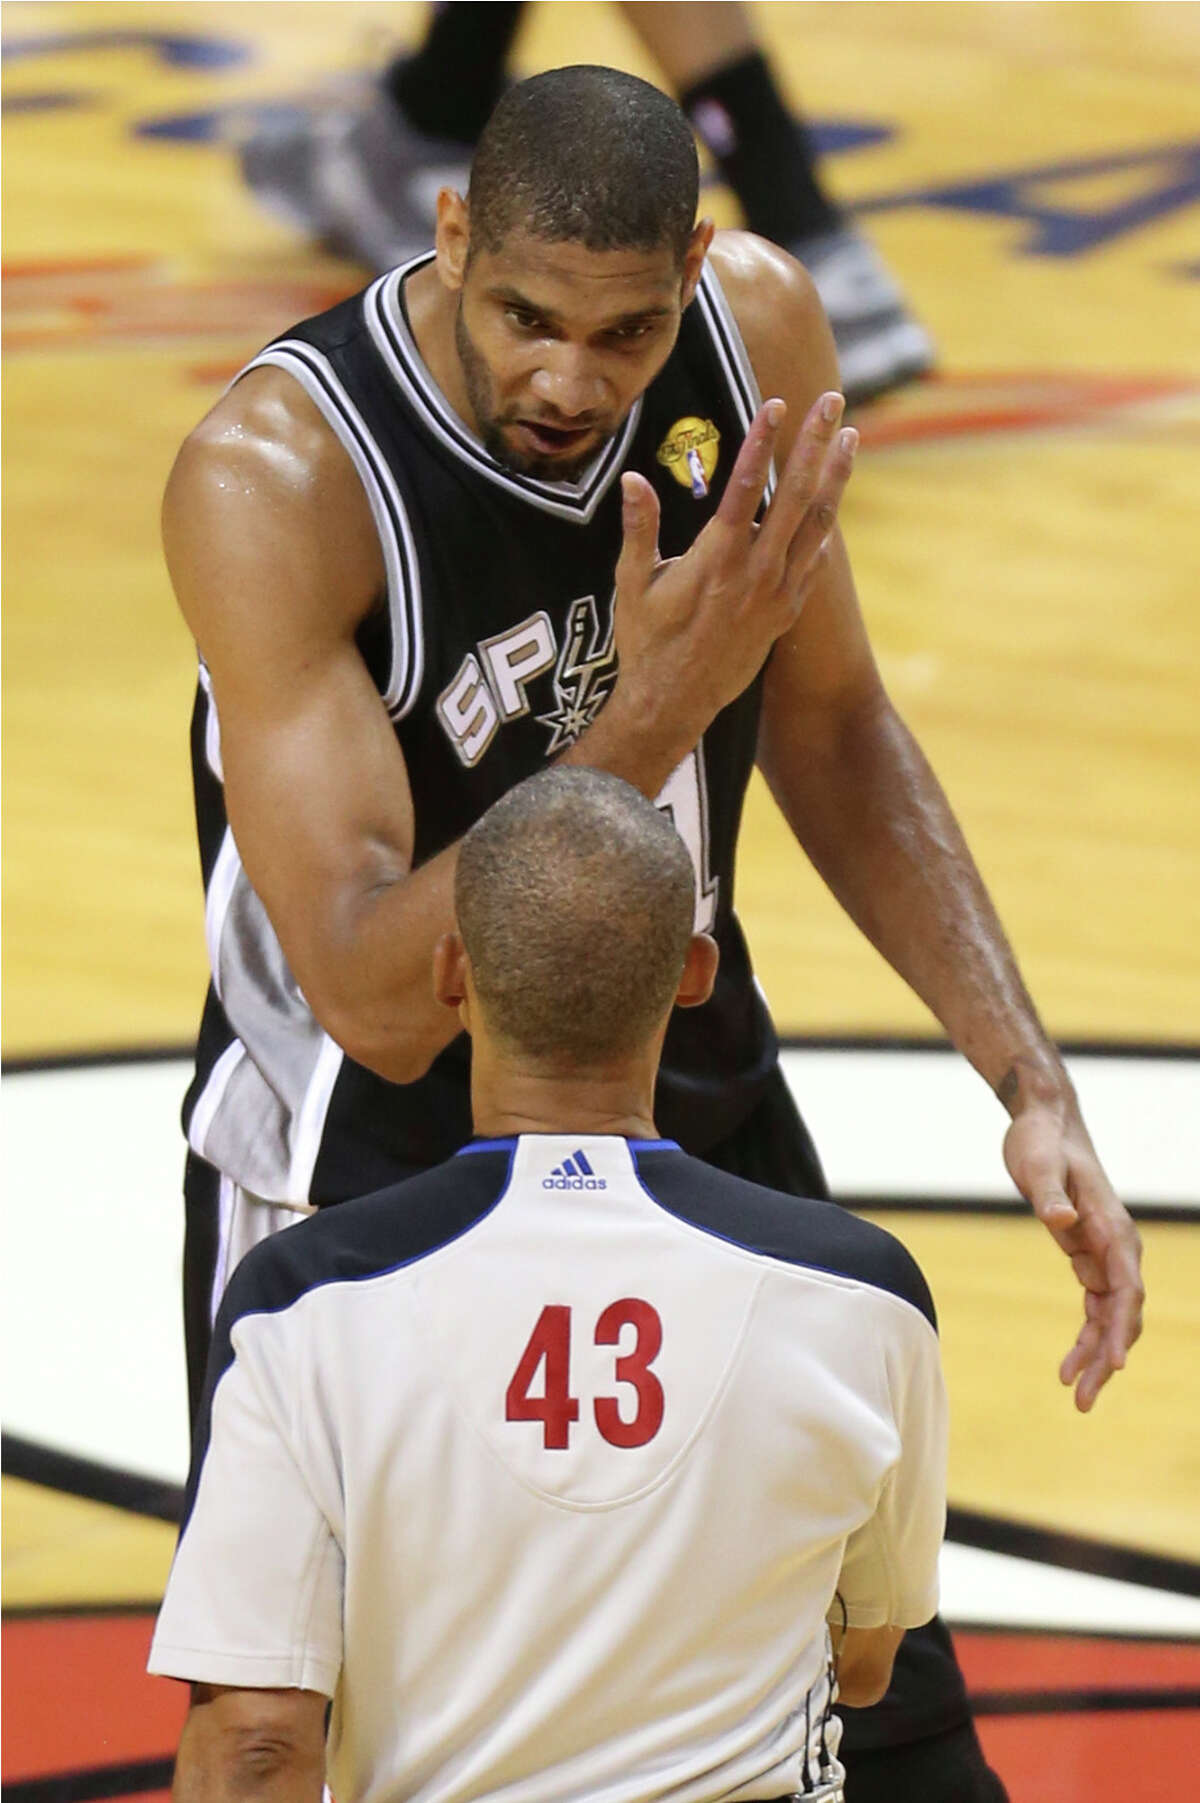 San Antonio Spurs' Tim Duncan argues a call with referee Dan Crawford during the first half of Game 7 of the NBA Finals at American Airlines Arena on Thursday, June 20, 2013 in Miami. (Jerry Lara/San Antonio Express-News)